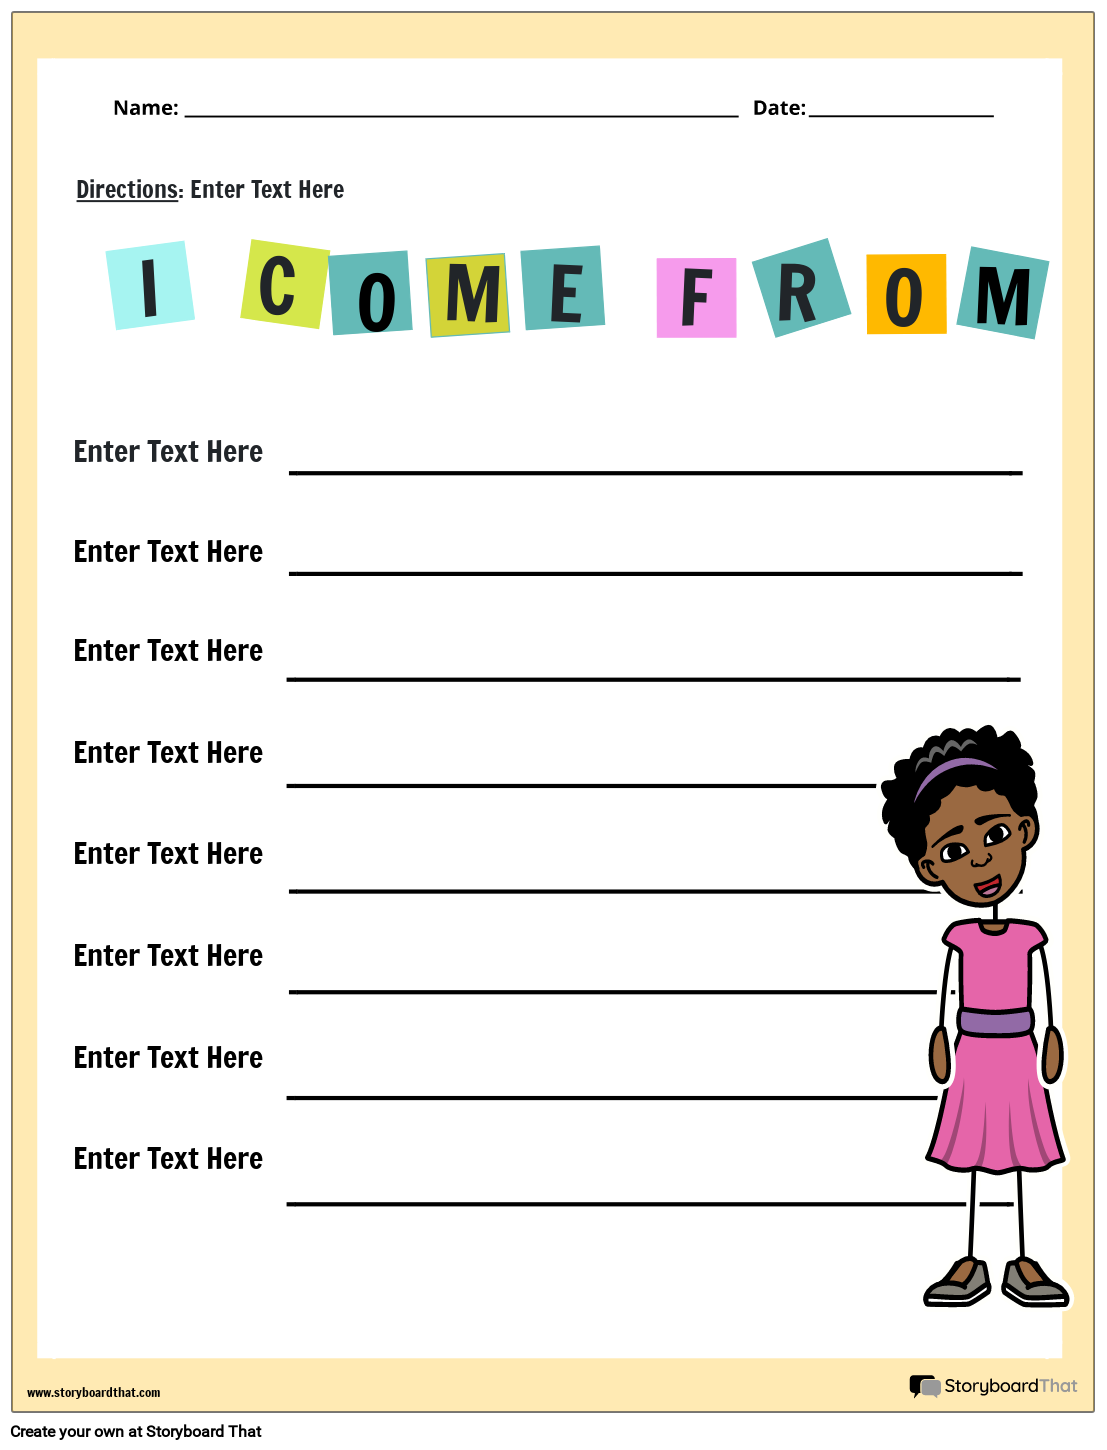 Colorful Character Based Poetry Worksheet Guide